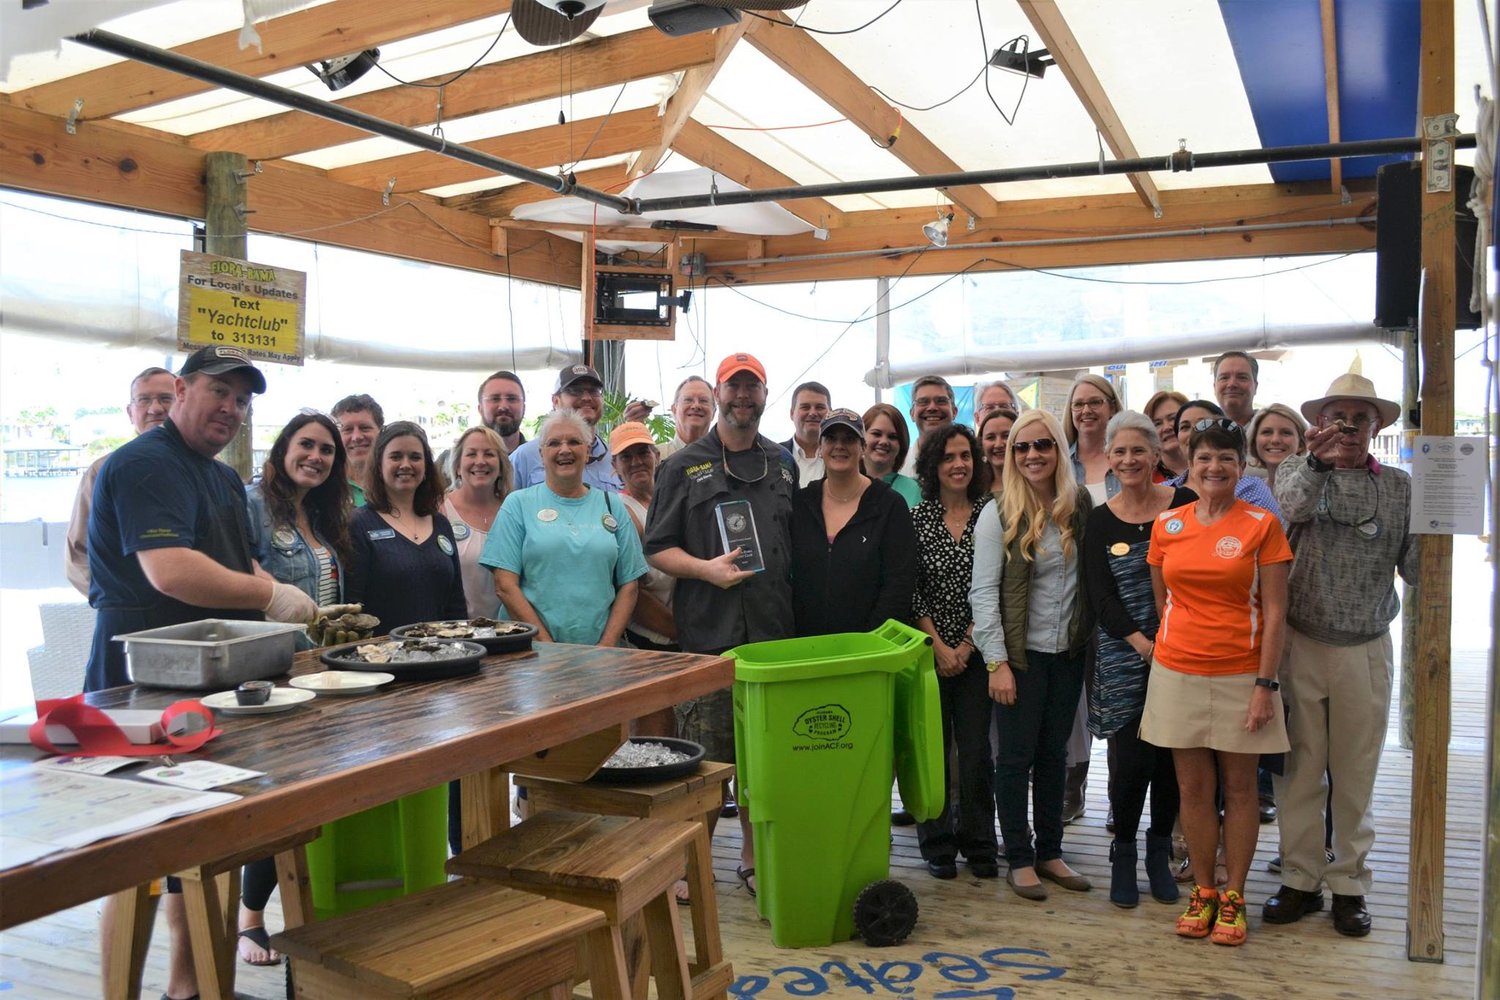 The Perdido Key Area Chamber of Commerce posted in 2017 about their participation in the Flora-Bama's Oyster Shell Recycling Program's ribbon cutting ceremony.